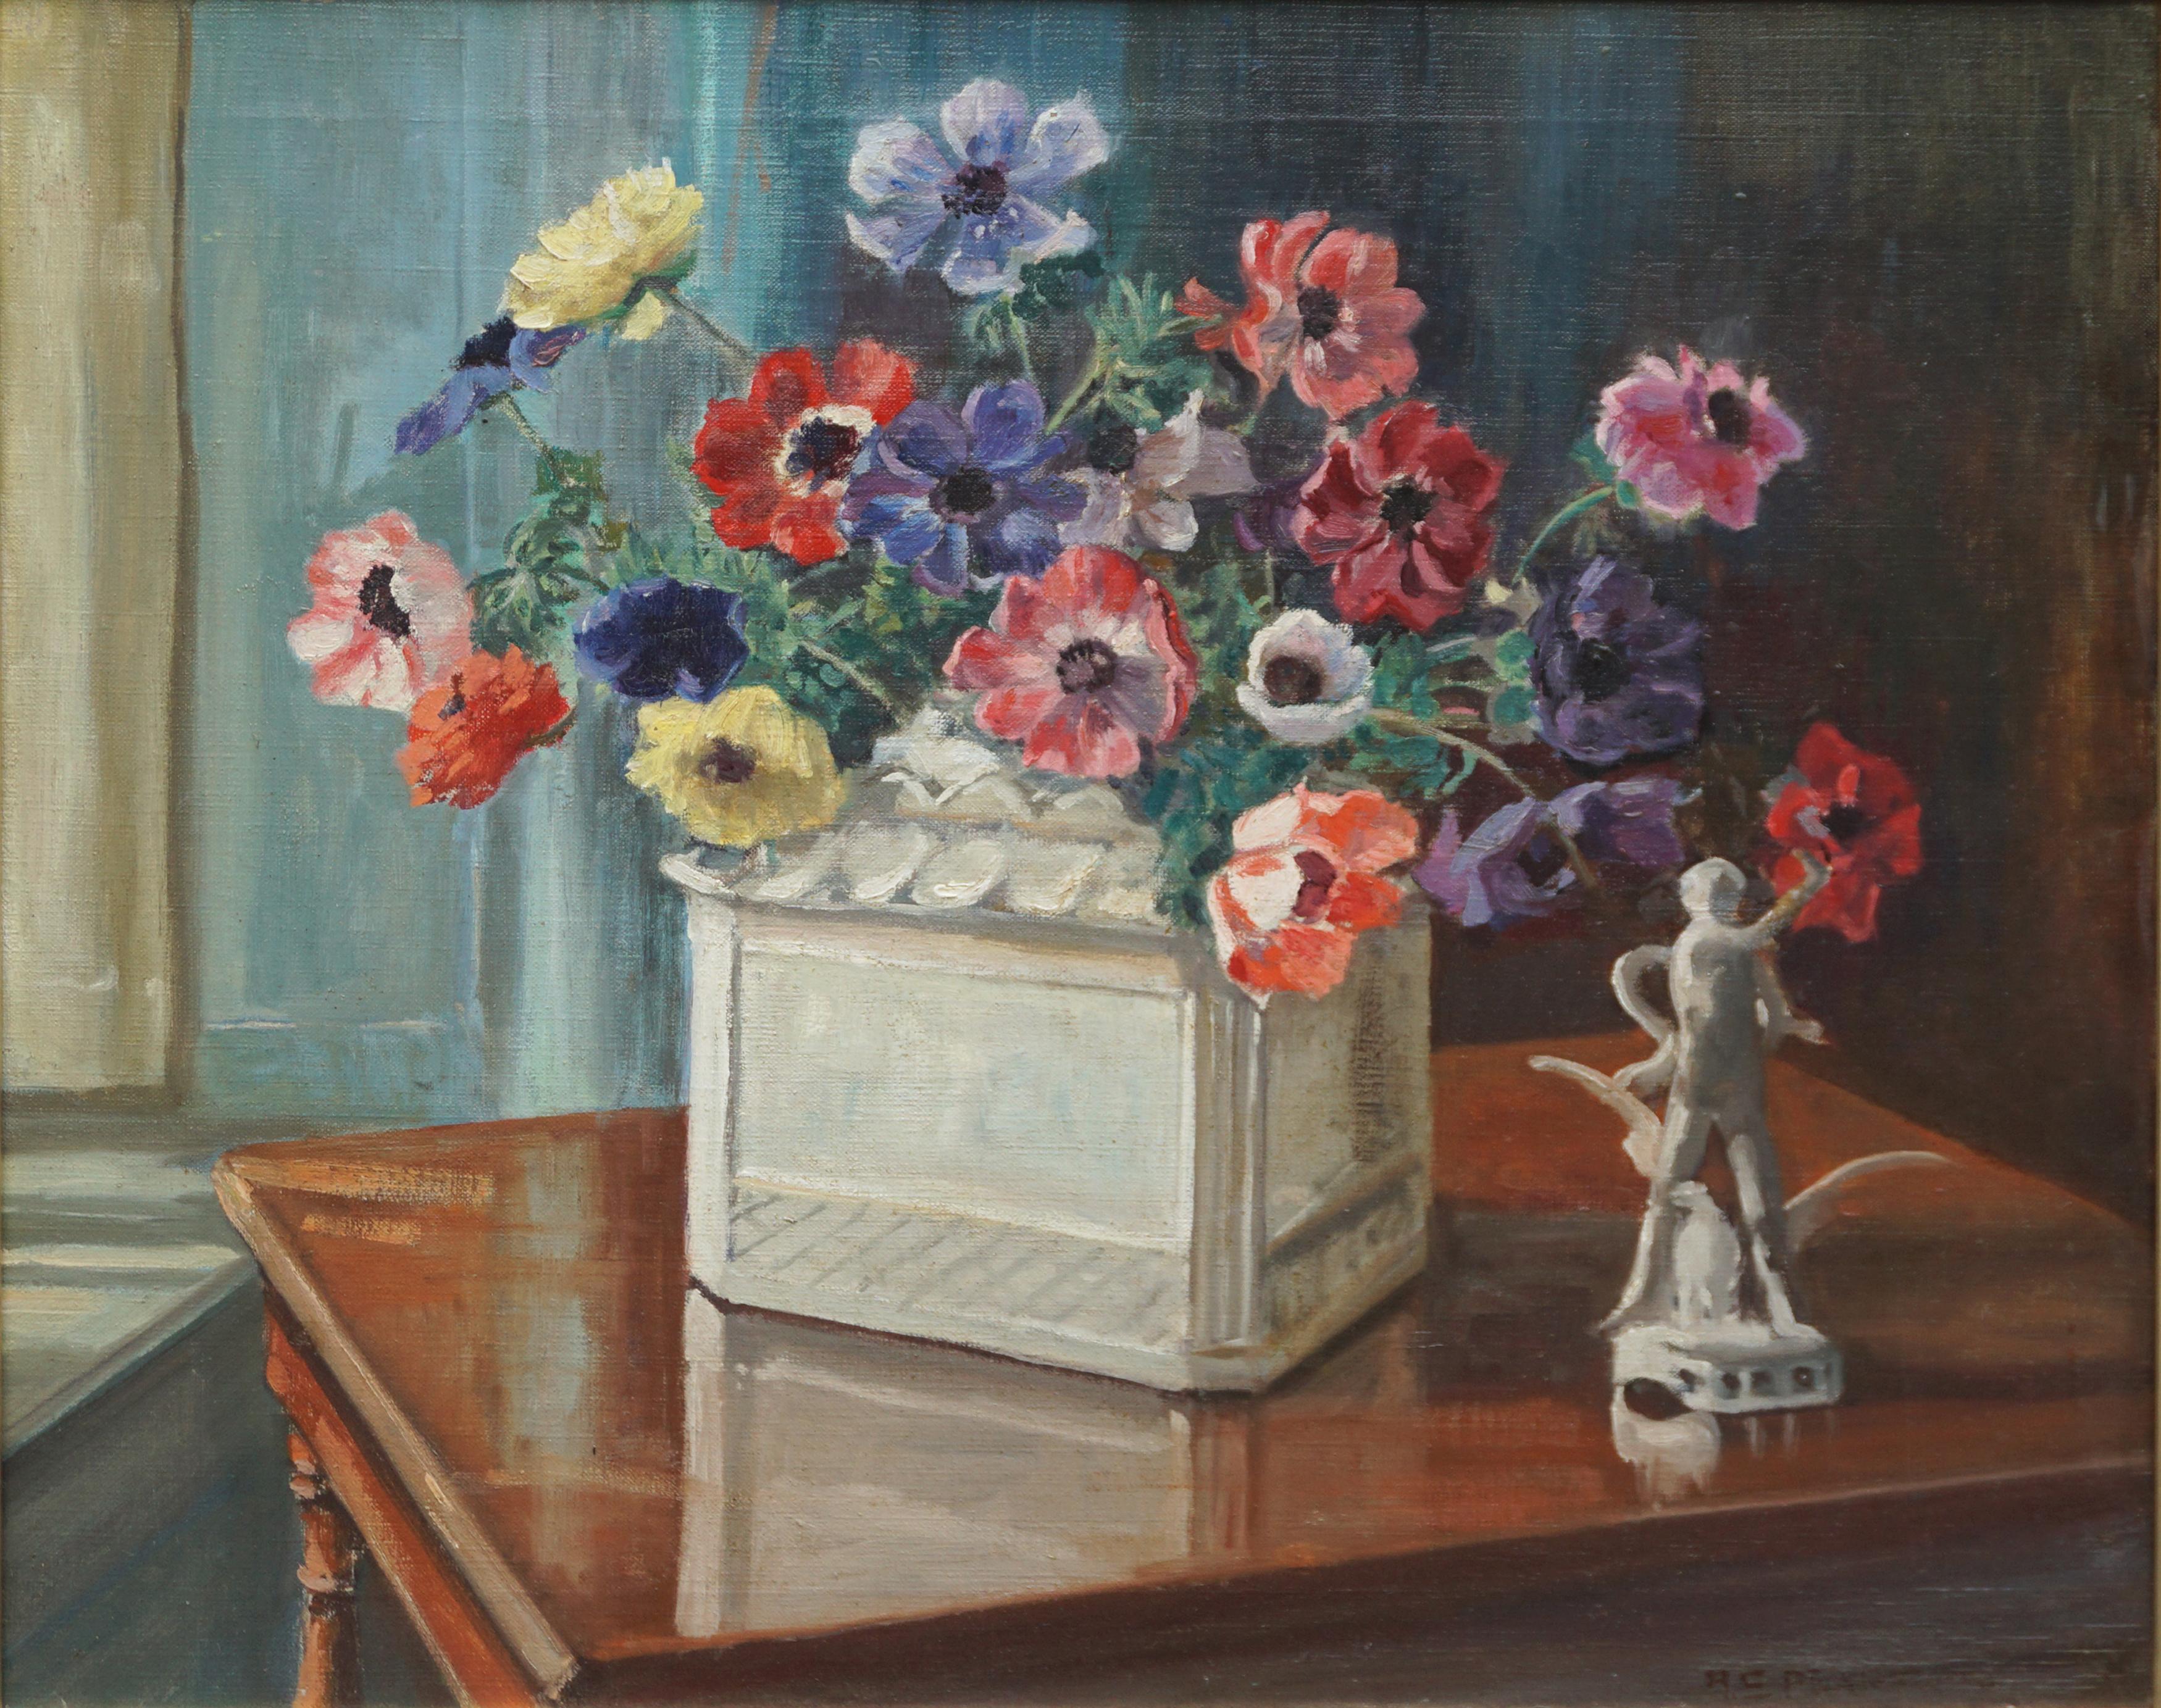 1940s Floral Still Life -- Anemones & Porcelain Statue - Painting by Marguerite Stuber Pearson